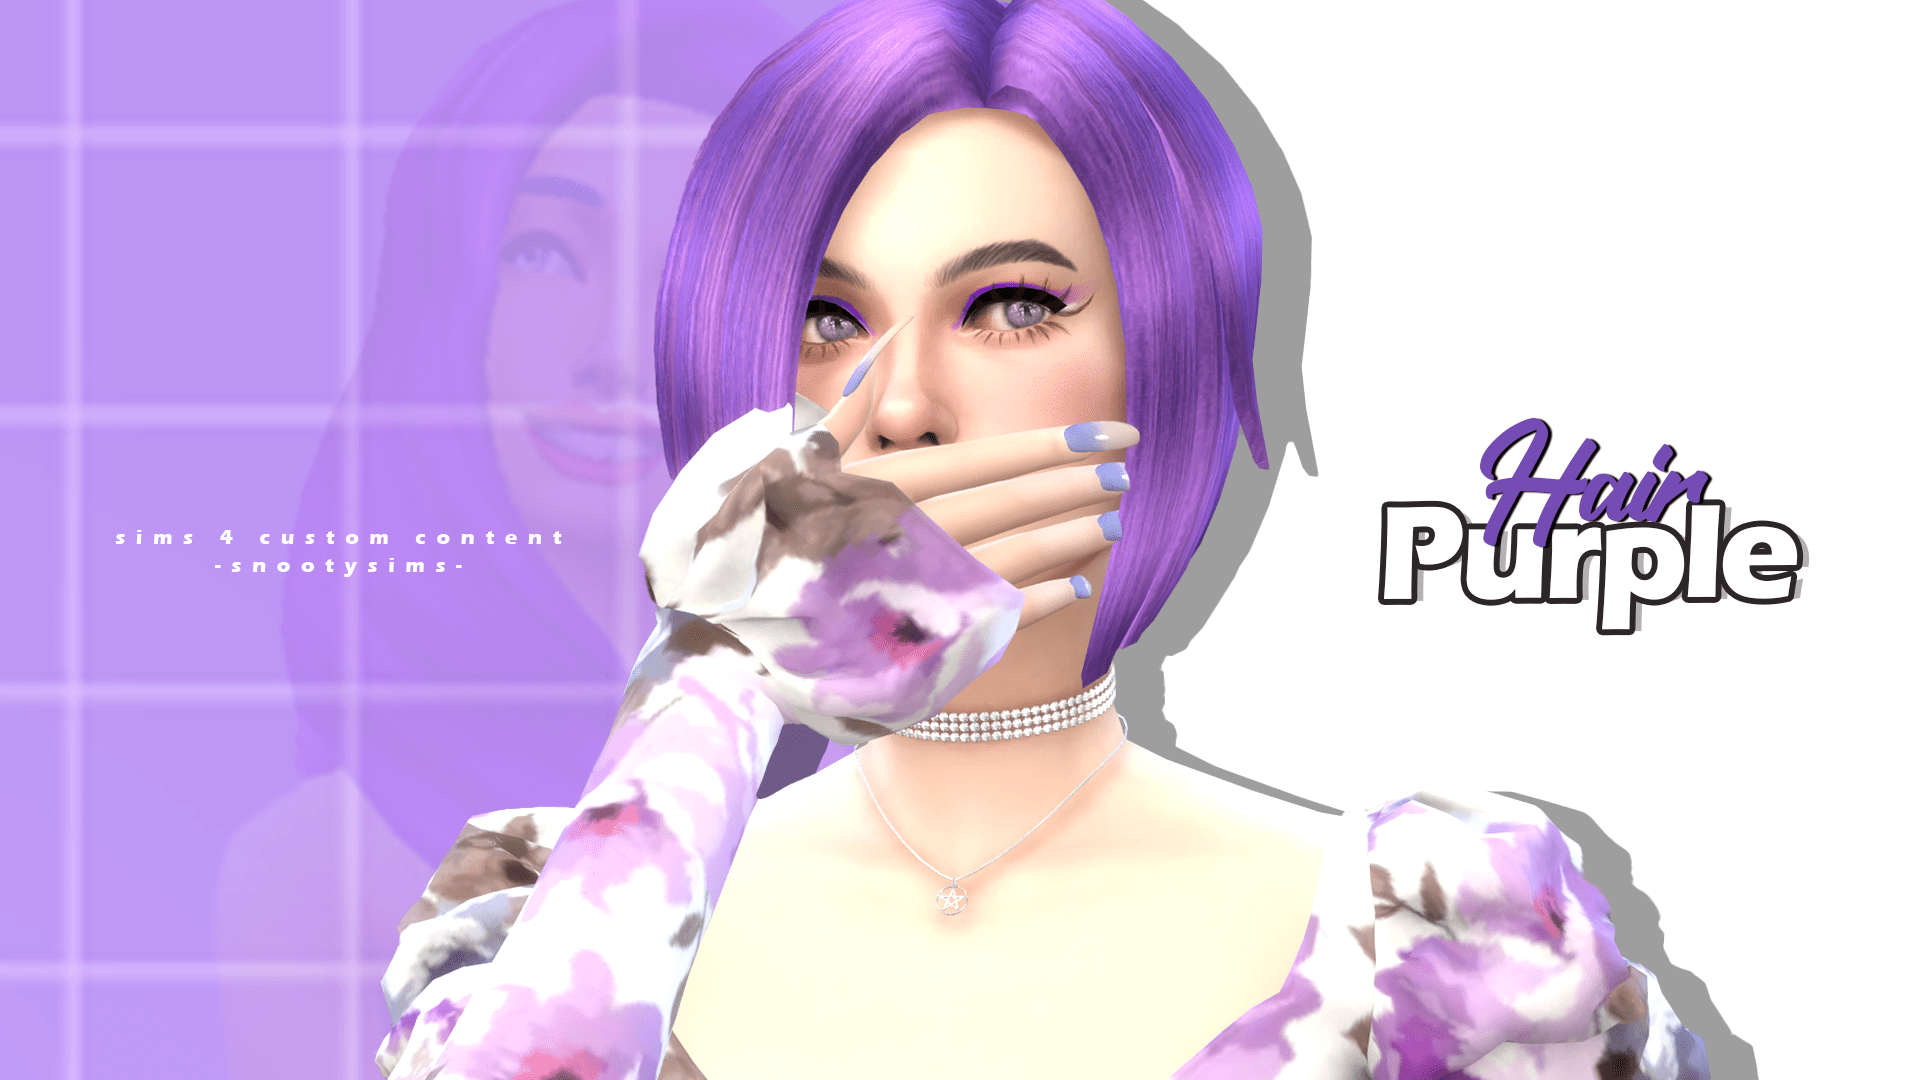 9. Sims 4 Custom Content: Purple and Blue Hair - wide 5